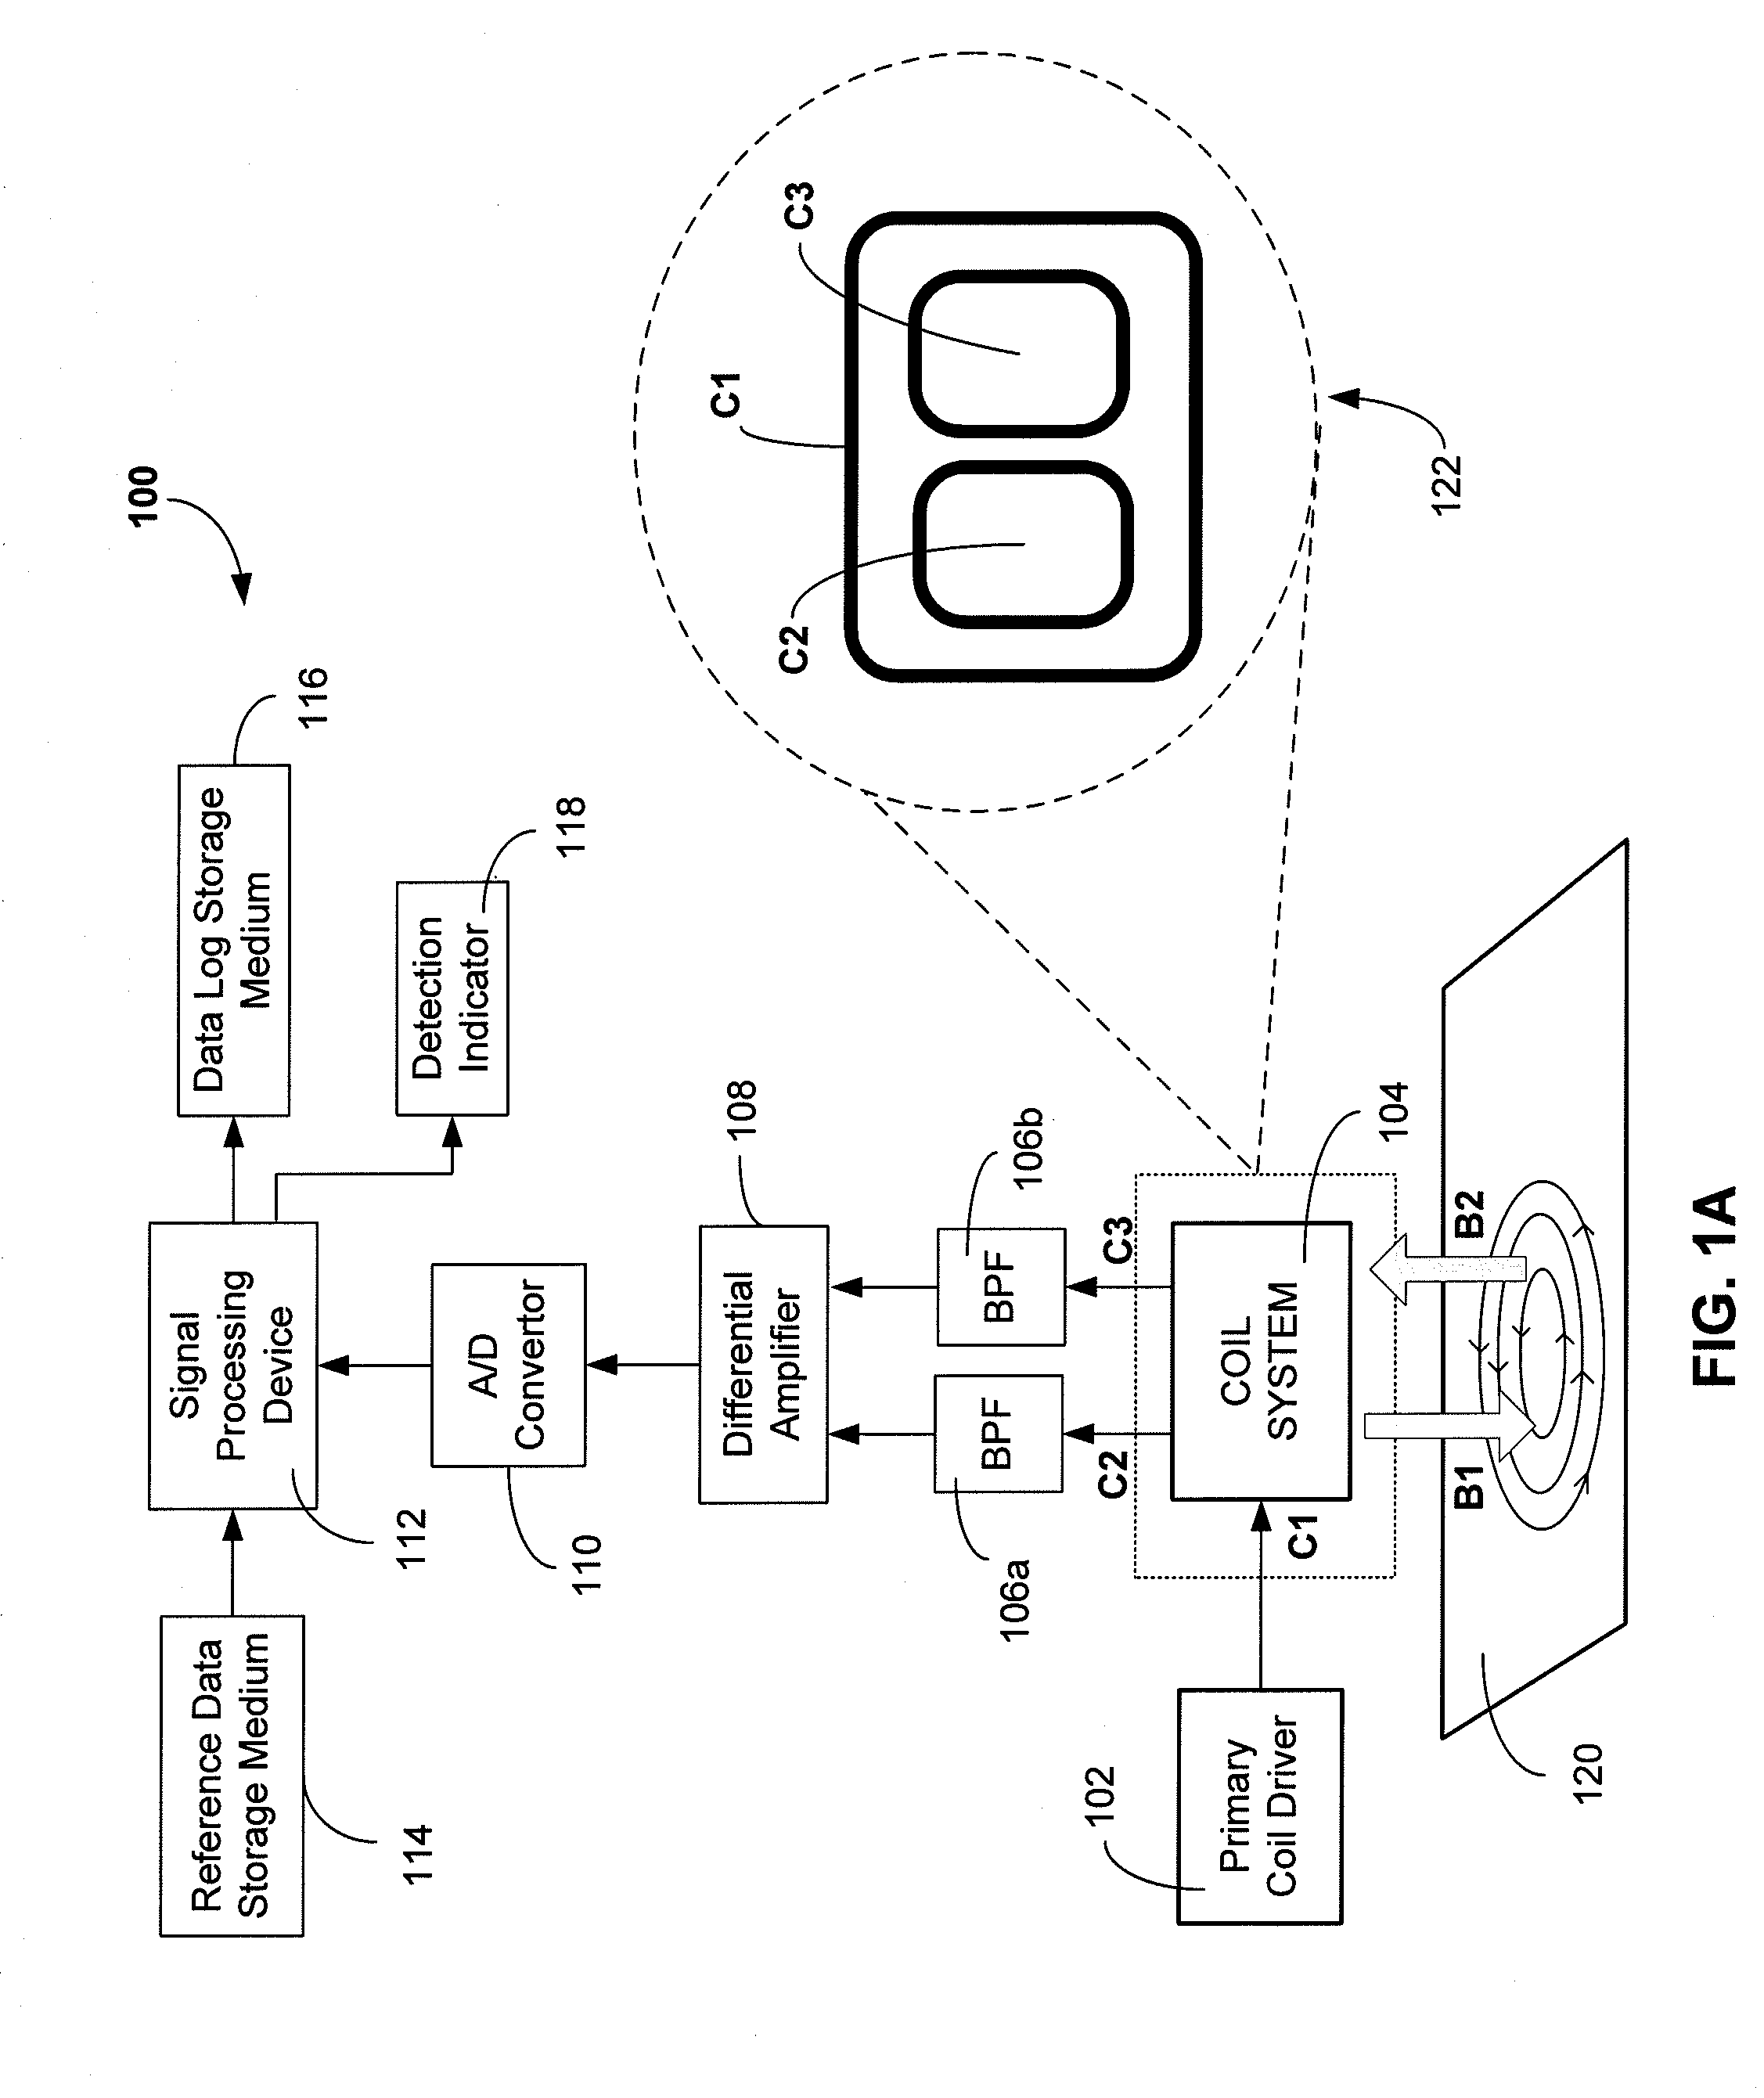 System and Method for Detecting Corrosion Pitting in Gas Turbines